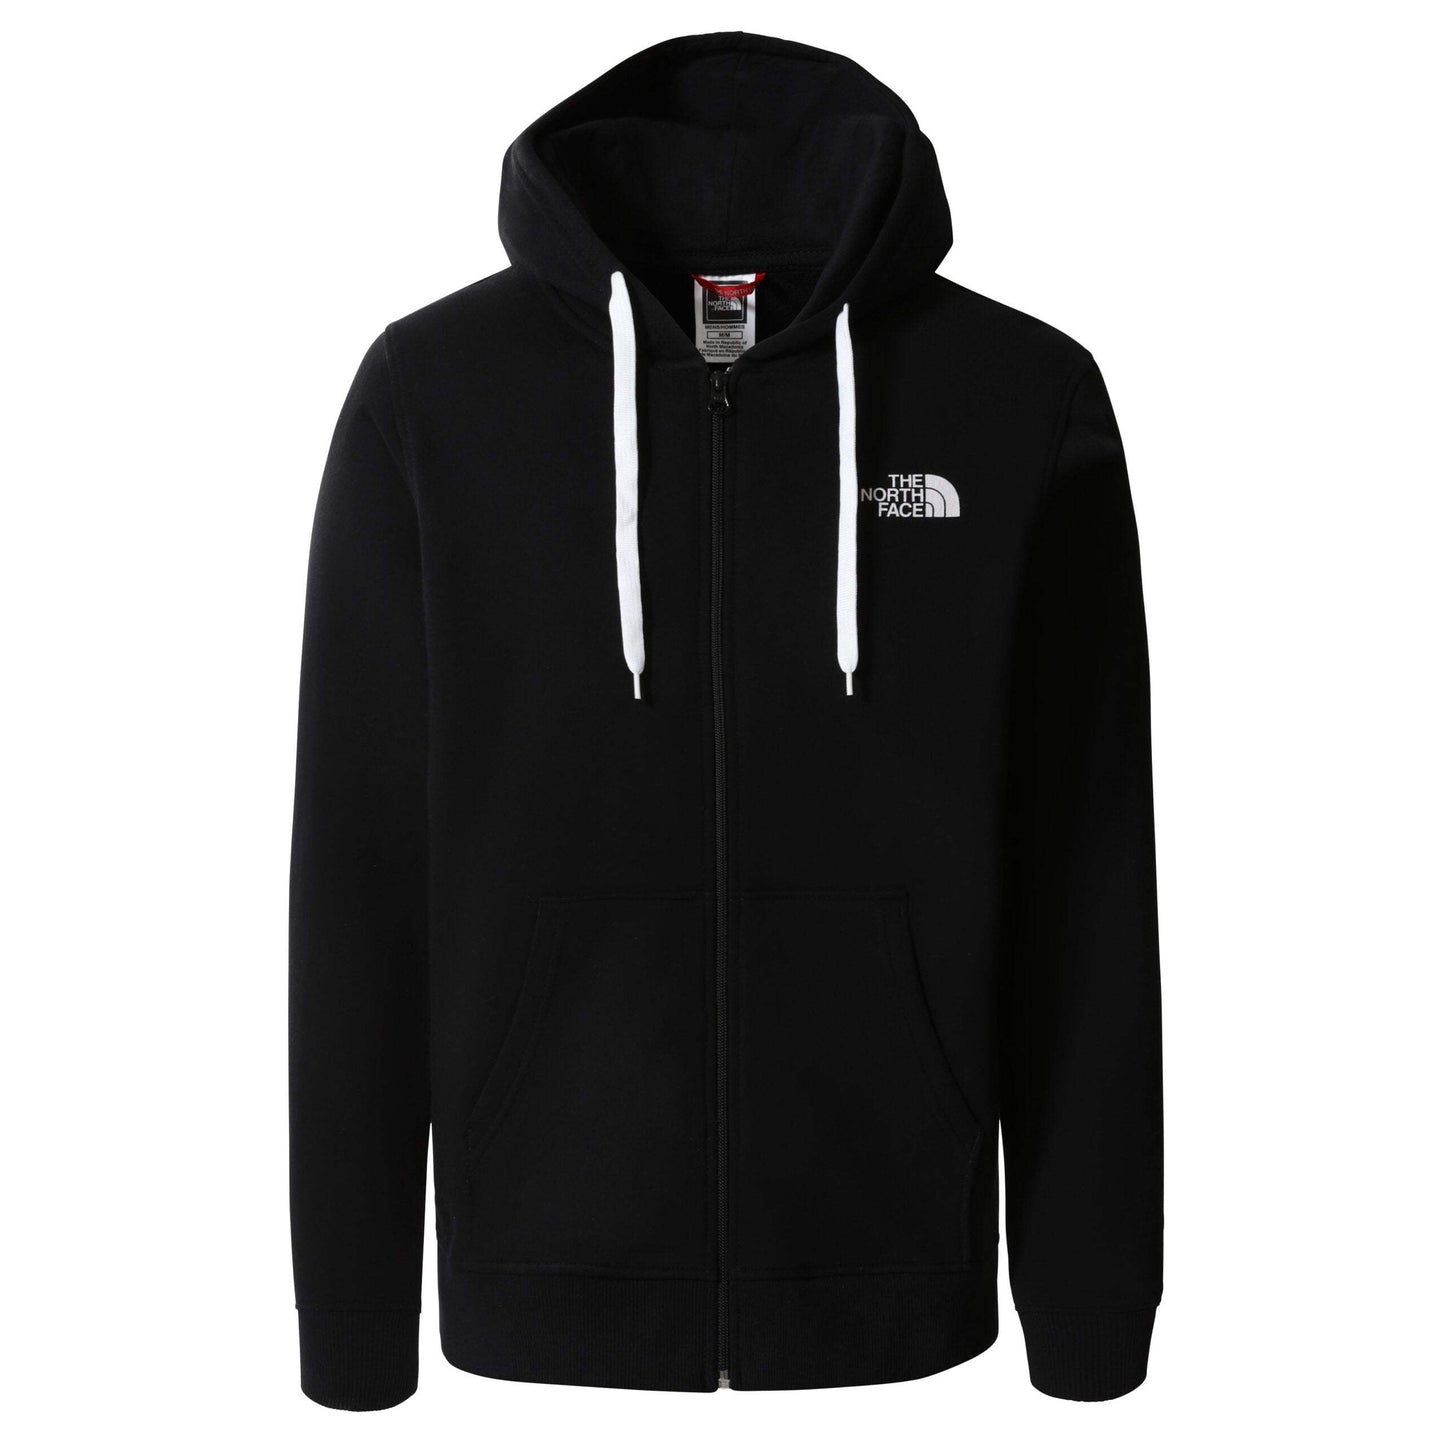 Open Gate Full Zip Men's Hoodie by The North Face - The Luxury Promotional Gifts Company Limited